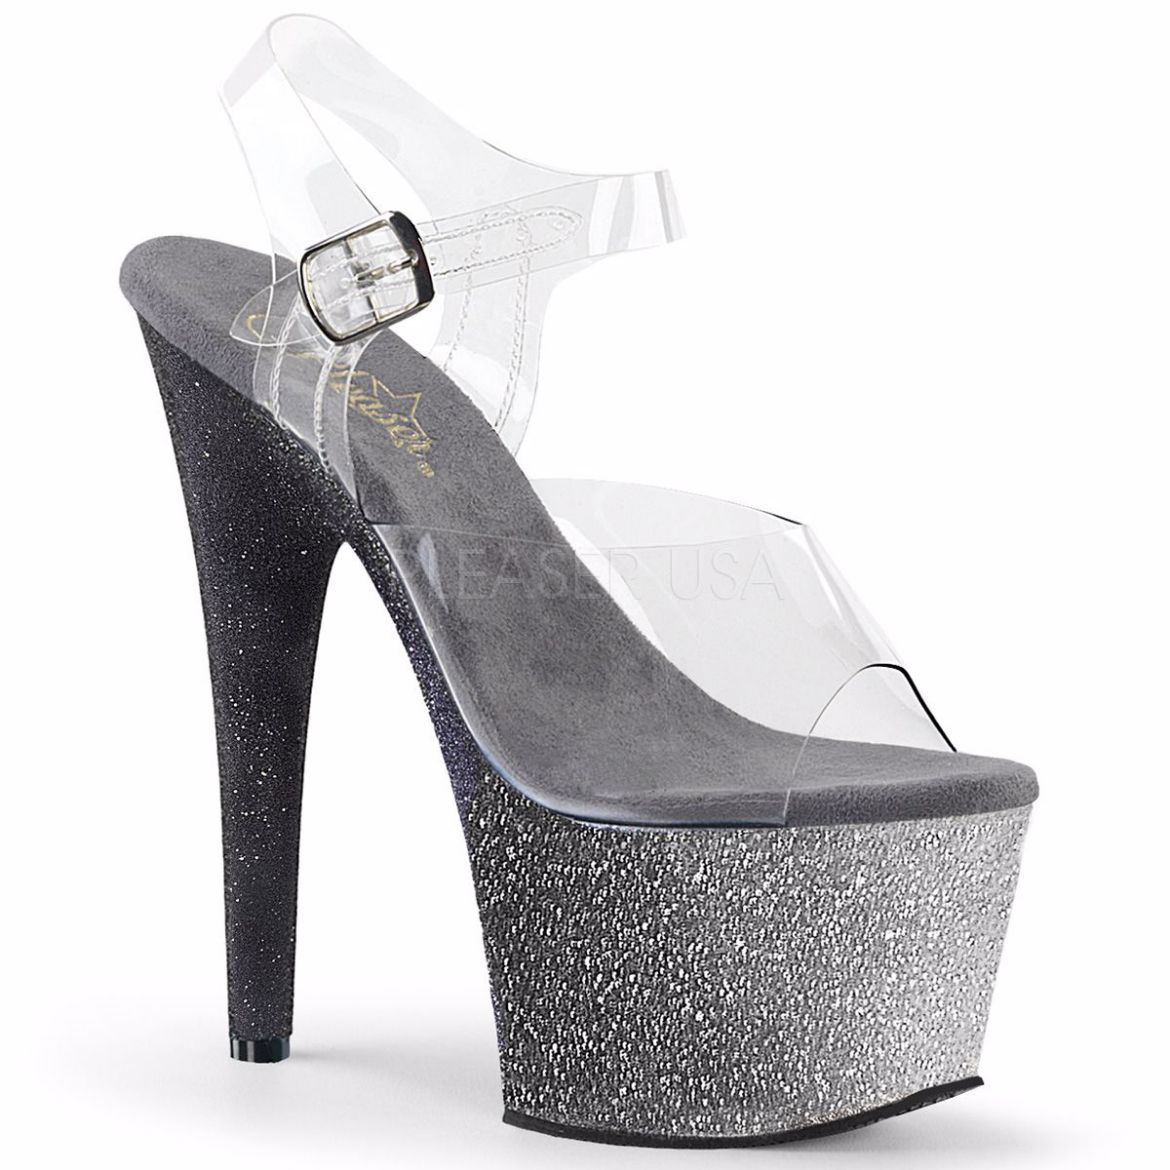 Product image of Pleaser Adore-708Ombre Clear/Silver-Black Ombre, 7 inch (17.8 cm) Heel, 2 3/4 inch (7 cm) Platform Sandal Shoes